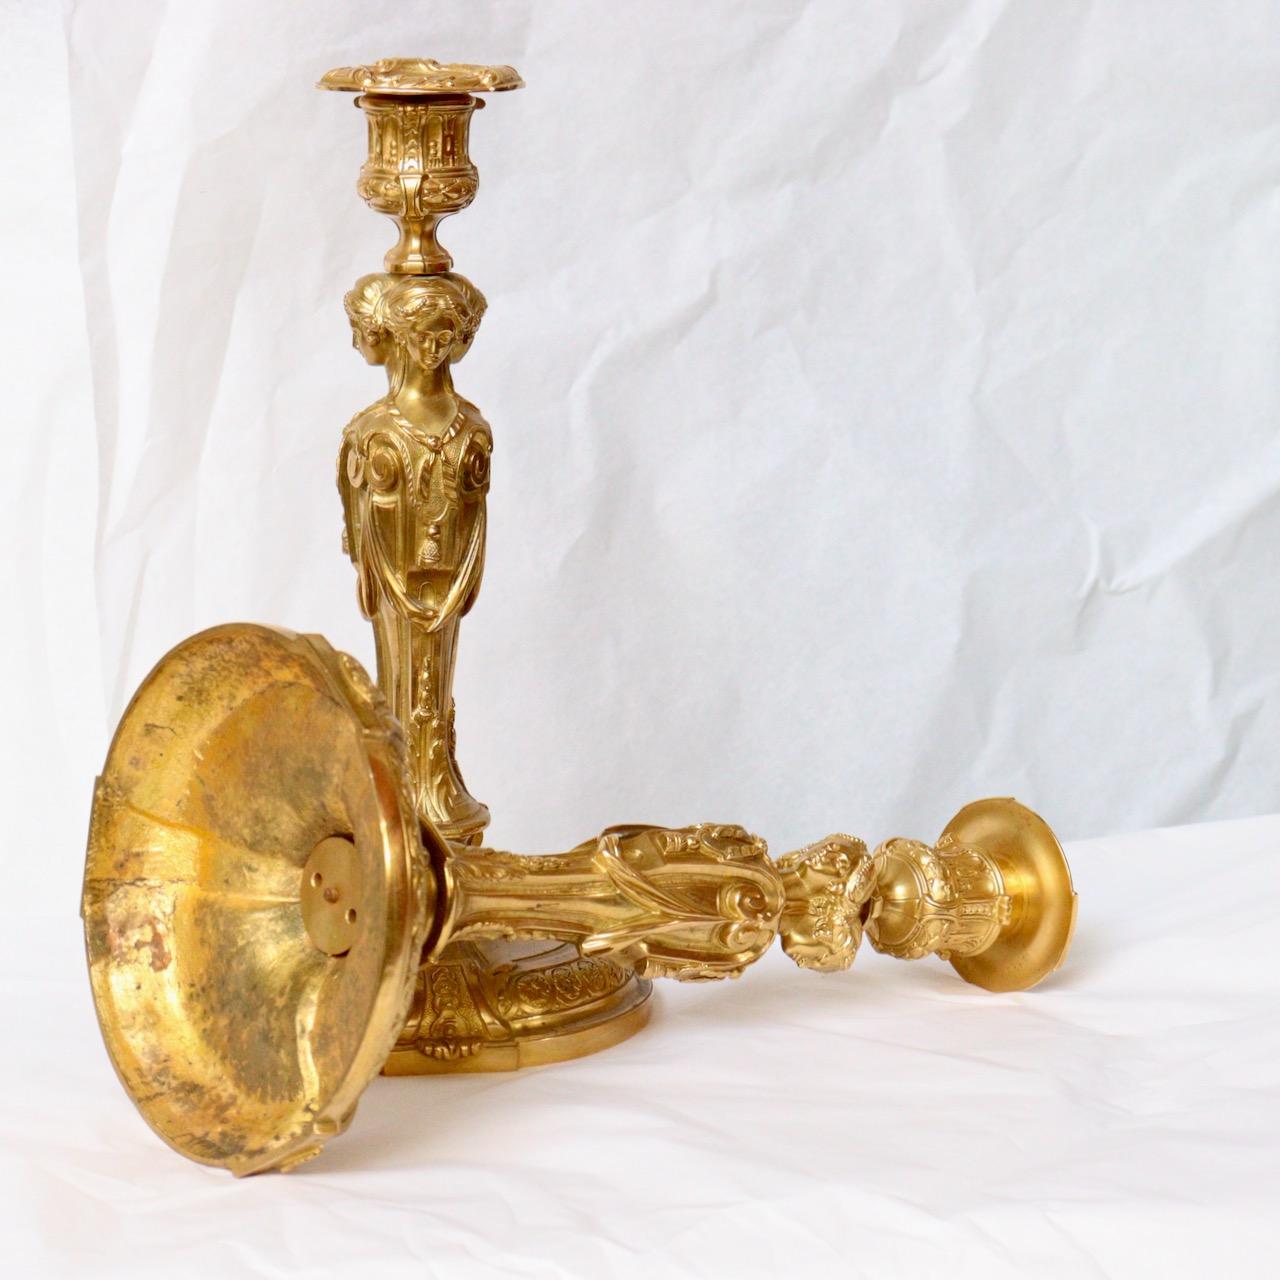 A Pair of Second Half 19th Century French Ormolu Louis XVI Style Candlesticks  2